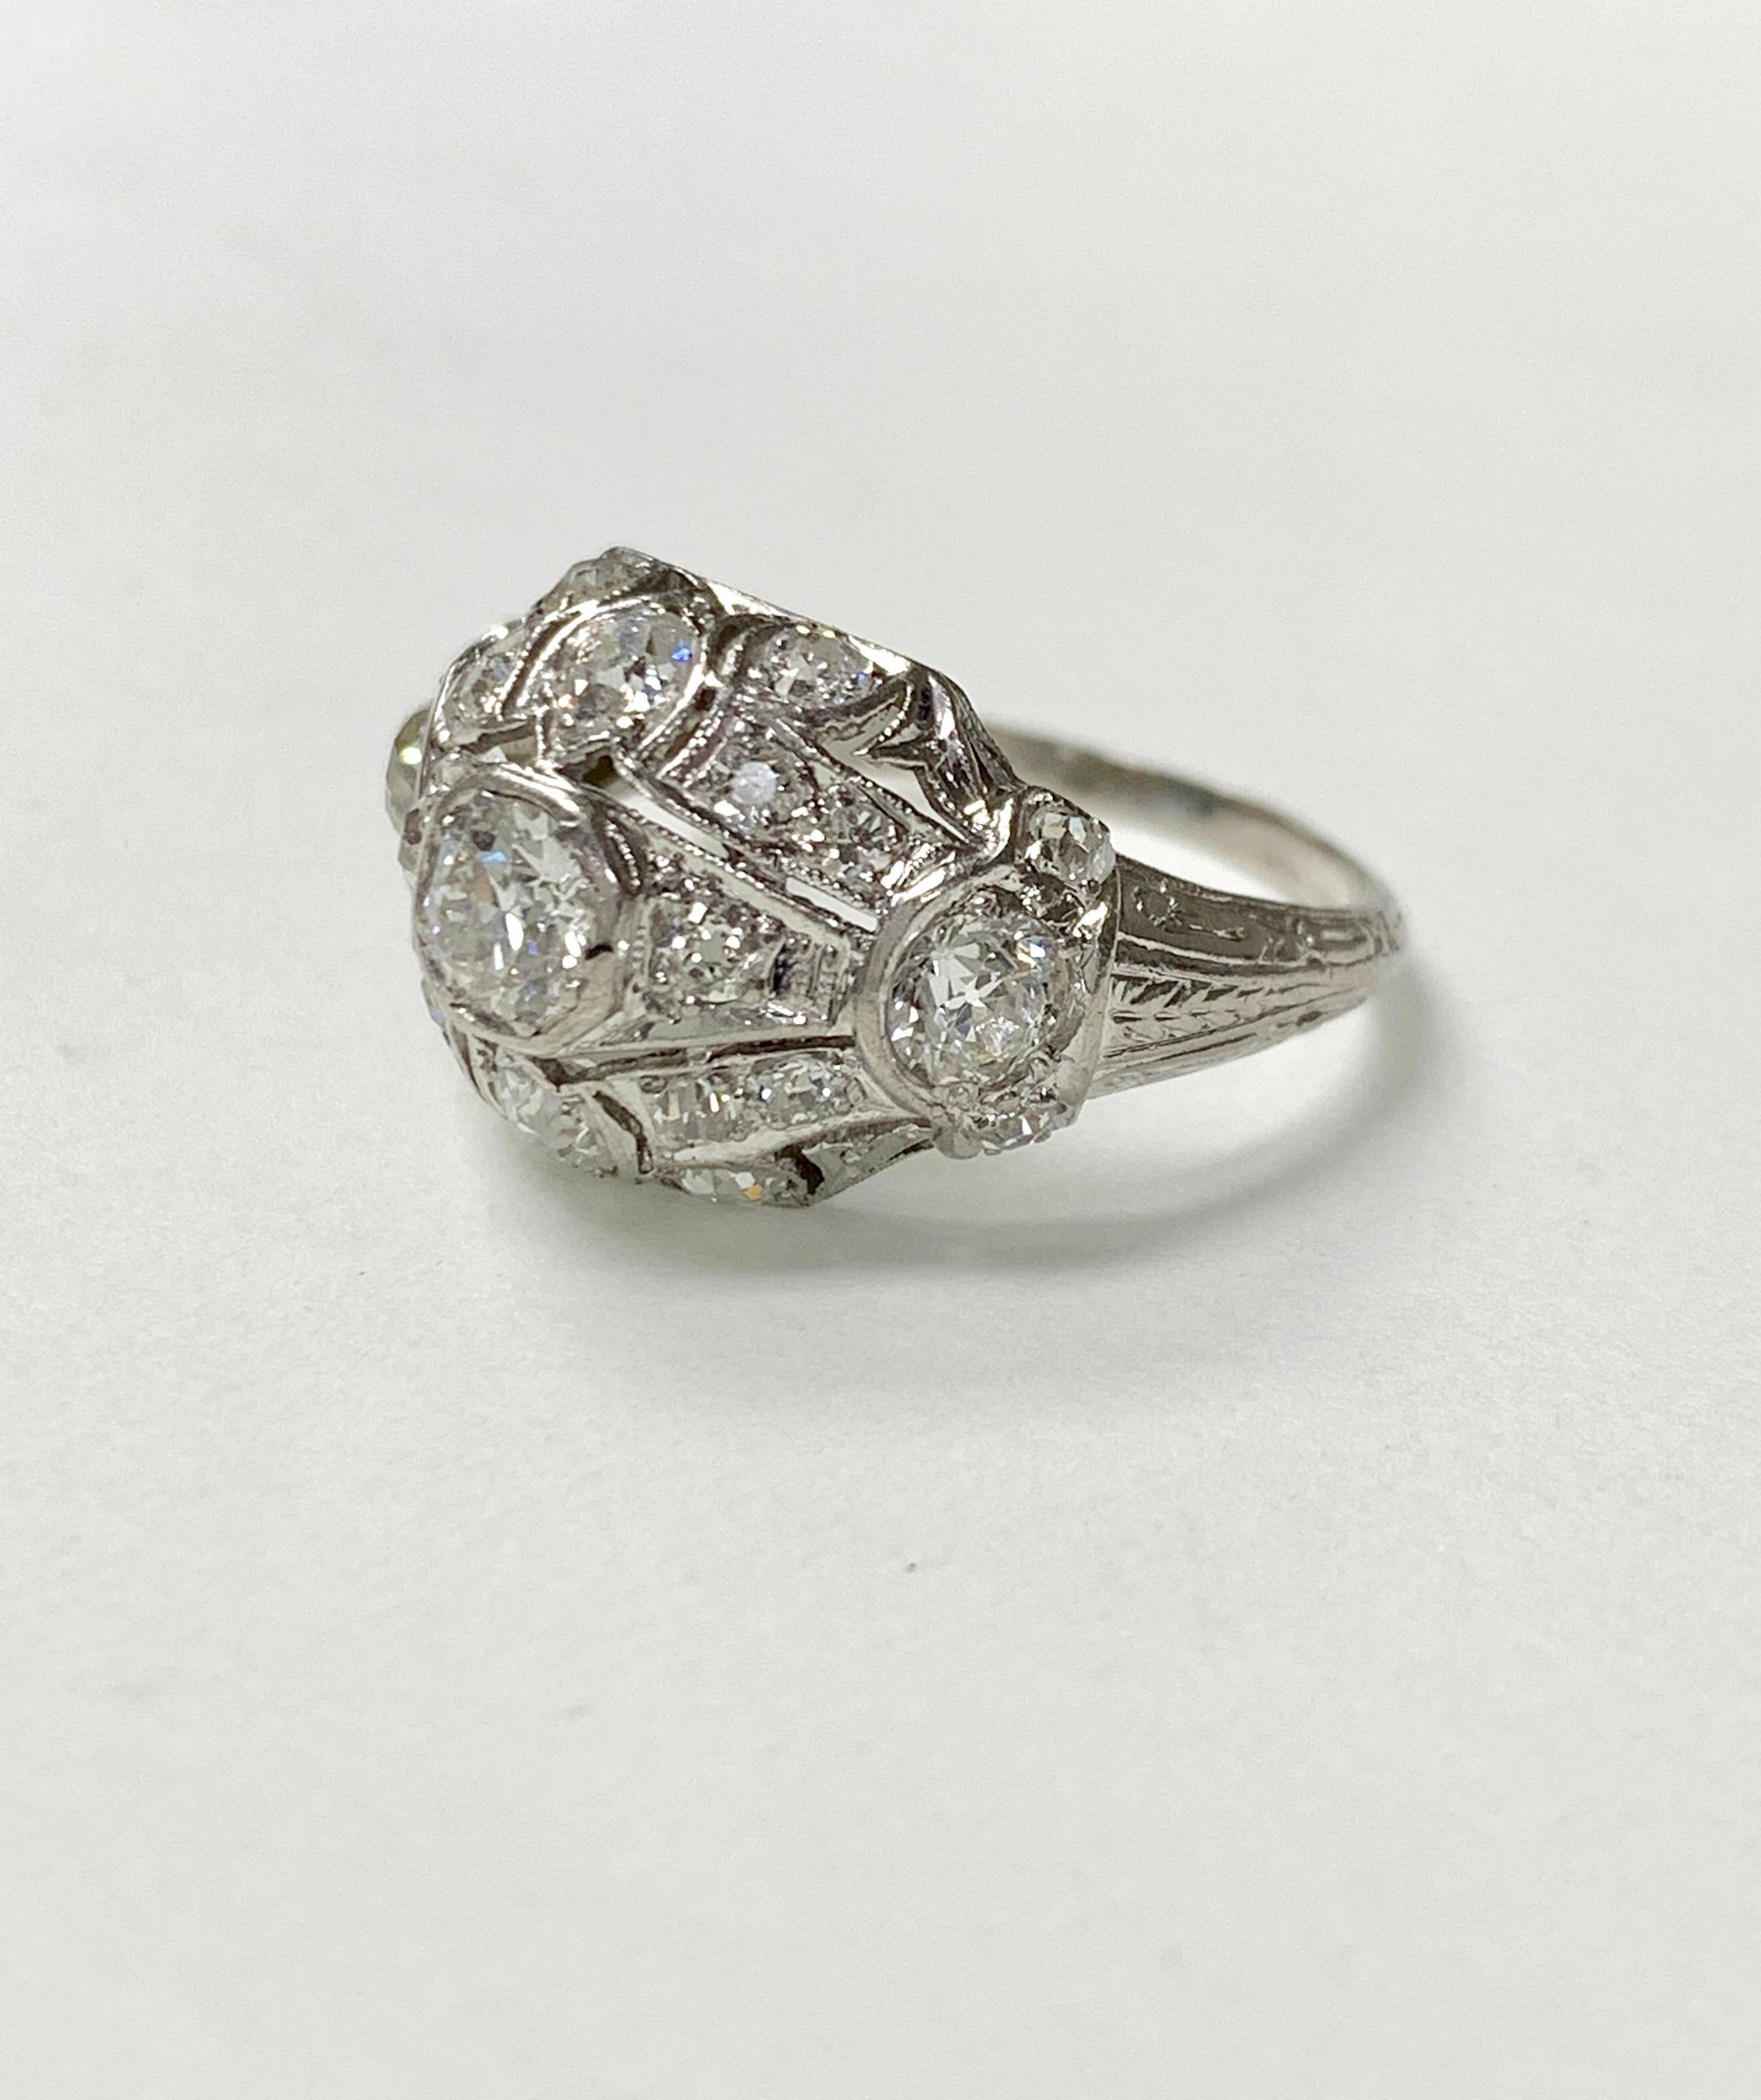 Antique 1920 White Old European Cut Diamond Ring In Platinum. 
The details are as follows: 
Old European cut diamond weight : 1 carat ( GH color and VS clarity ) 
Metal : Platinum 
Ring size : 7 1/2 
Measurements: 1/2 inch wide 

